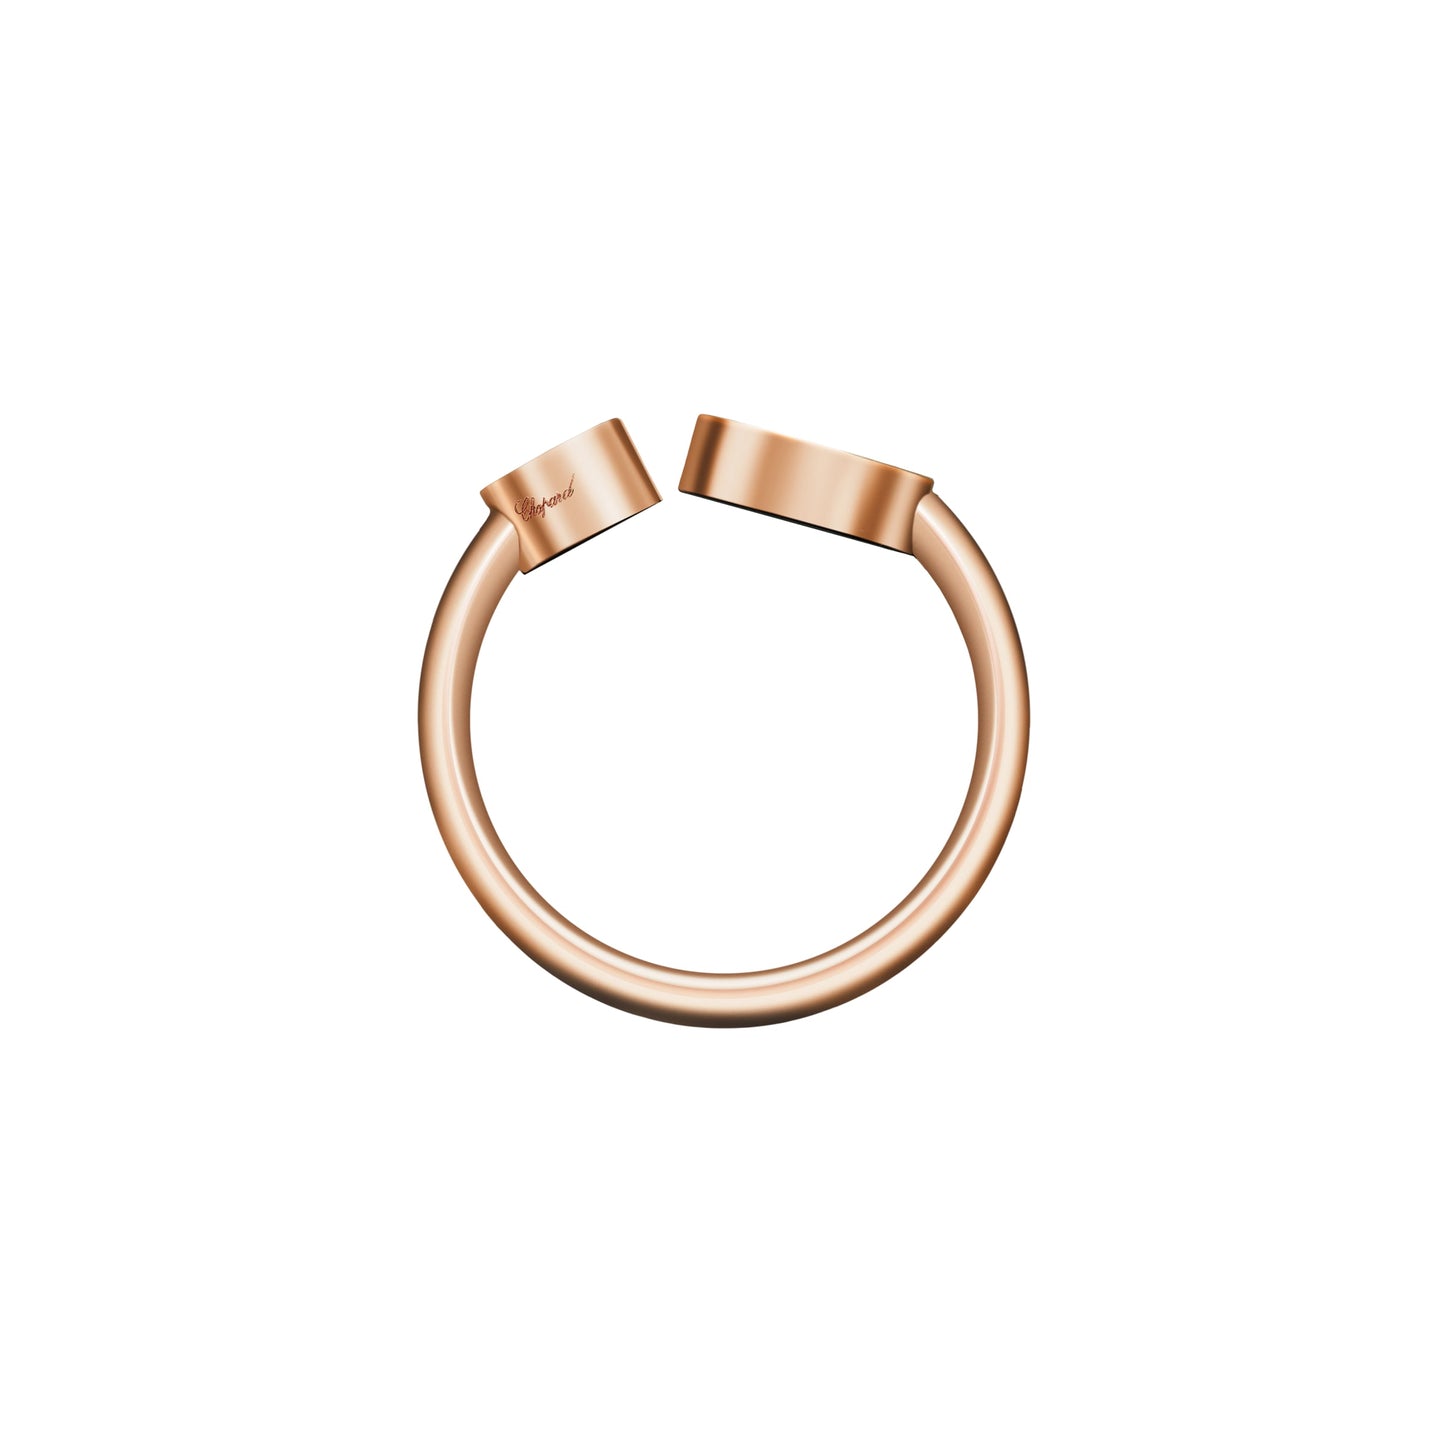 HAPPY HEARTS RING, ETHICAL ROSE GOLD, DIAMOND, TURQUOISE STONE 829482-5400